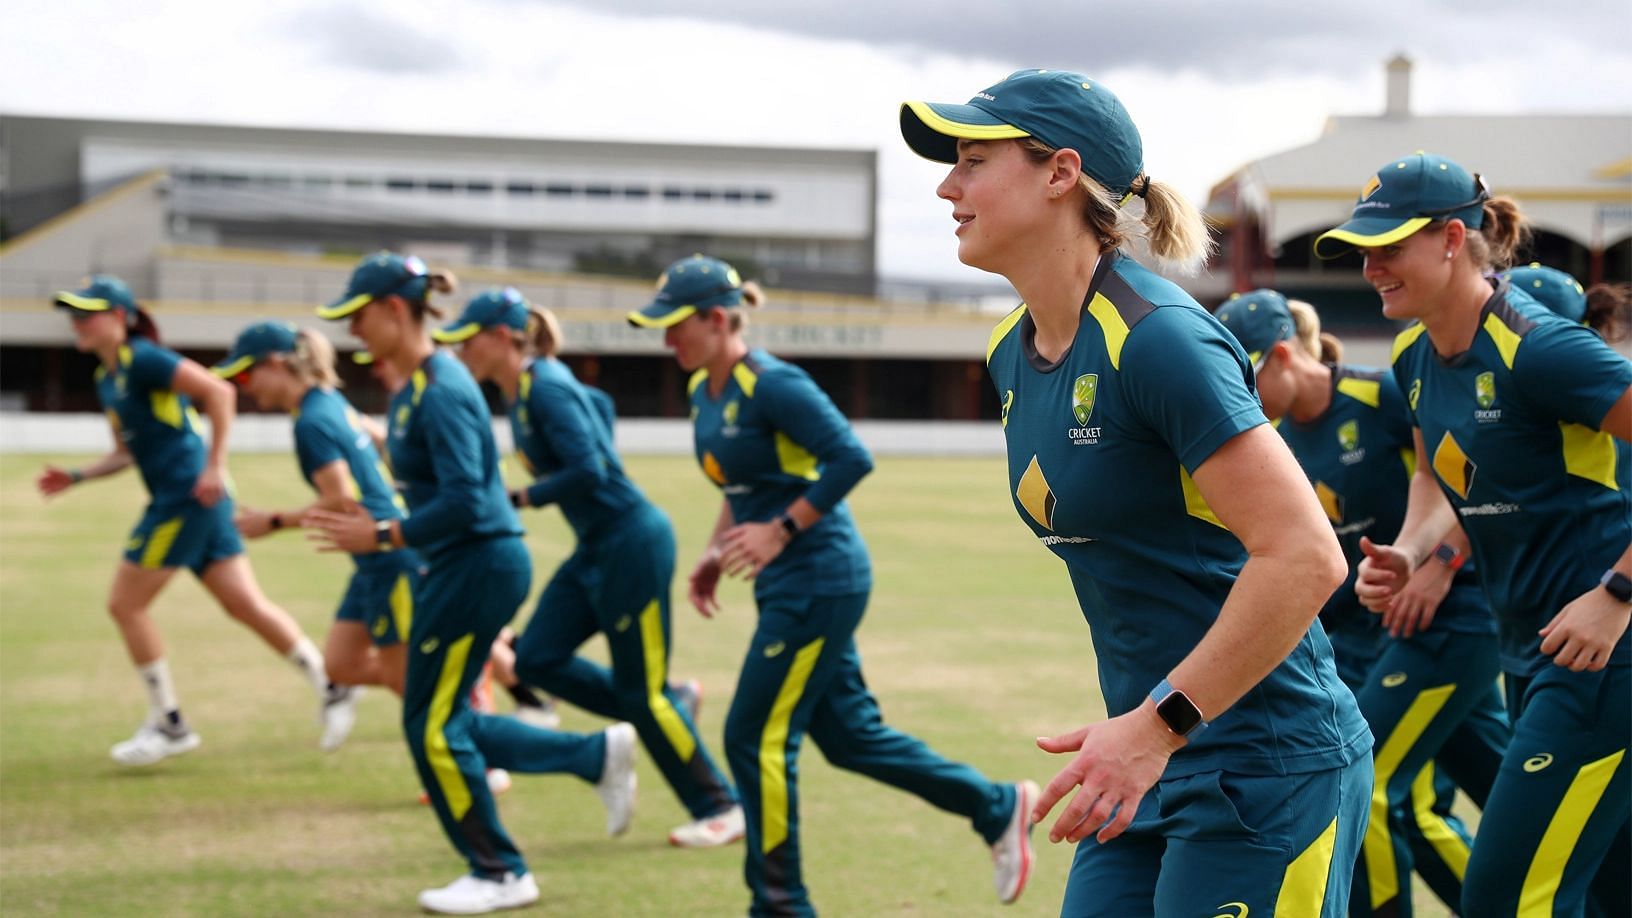 <div class="paragraphs"><p>CWG 2022: World Cup winning Australian team could skip the Opening Ceremony to focus on their first game.</p></div>